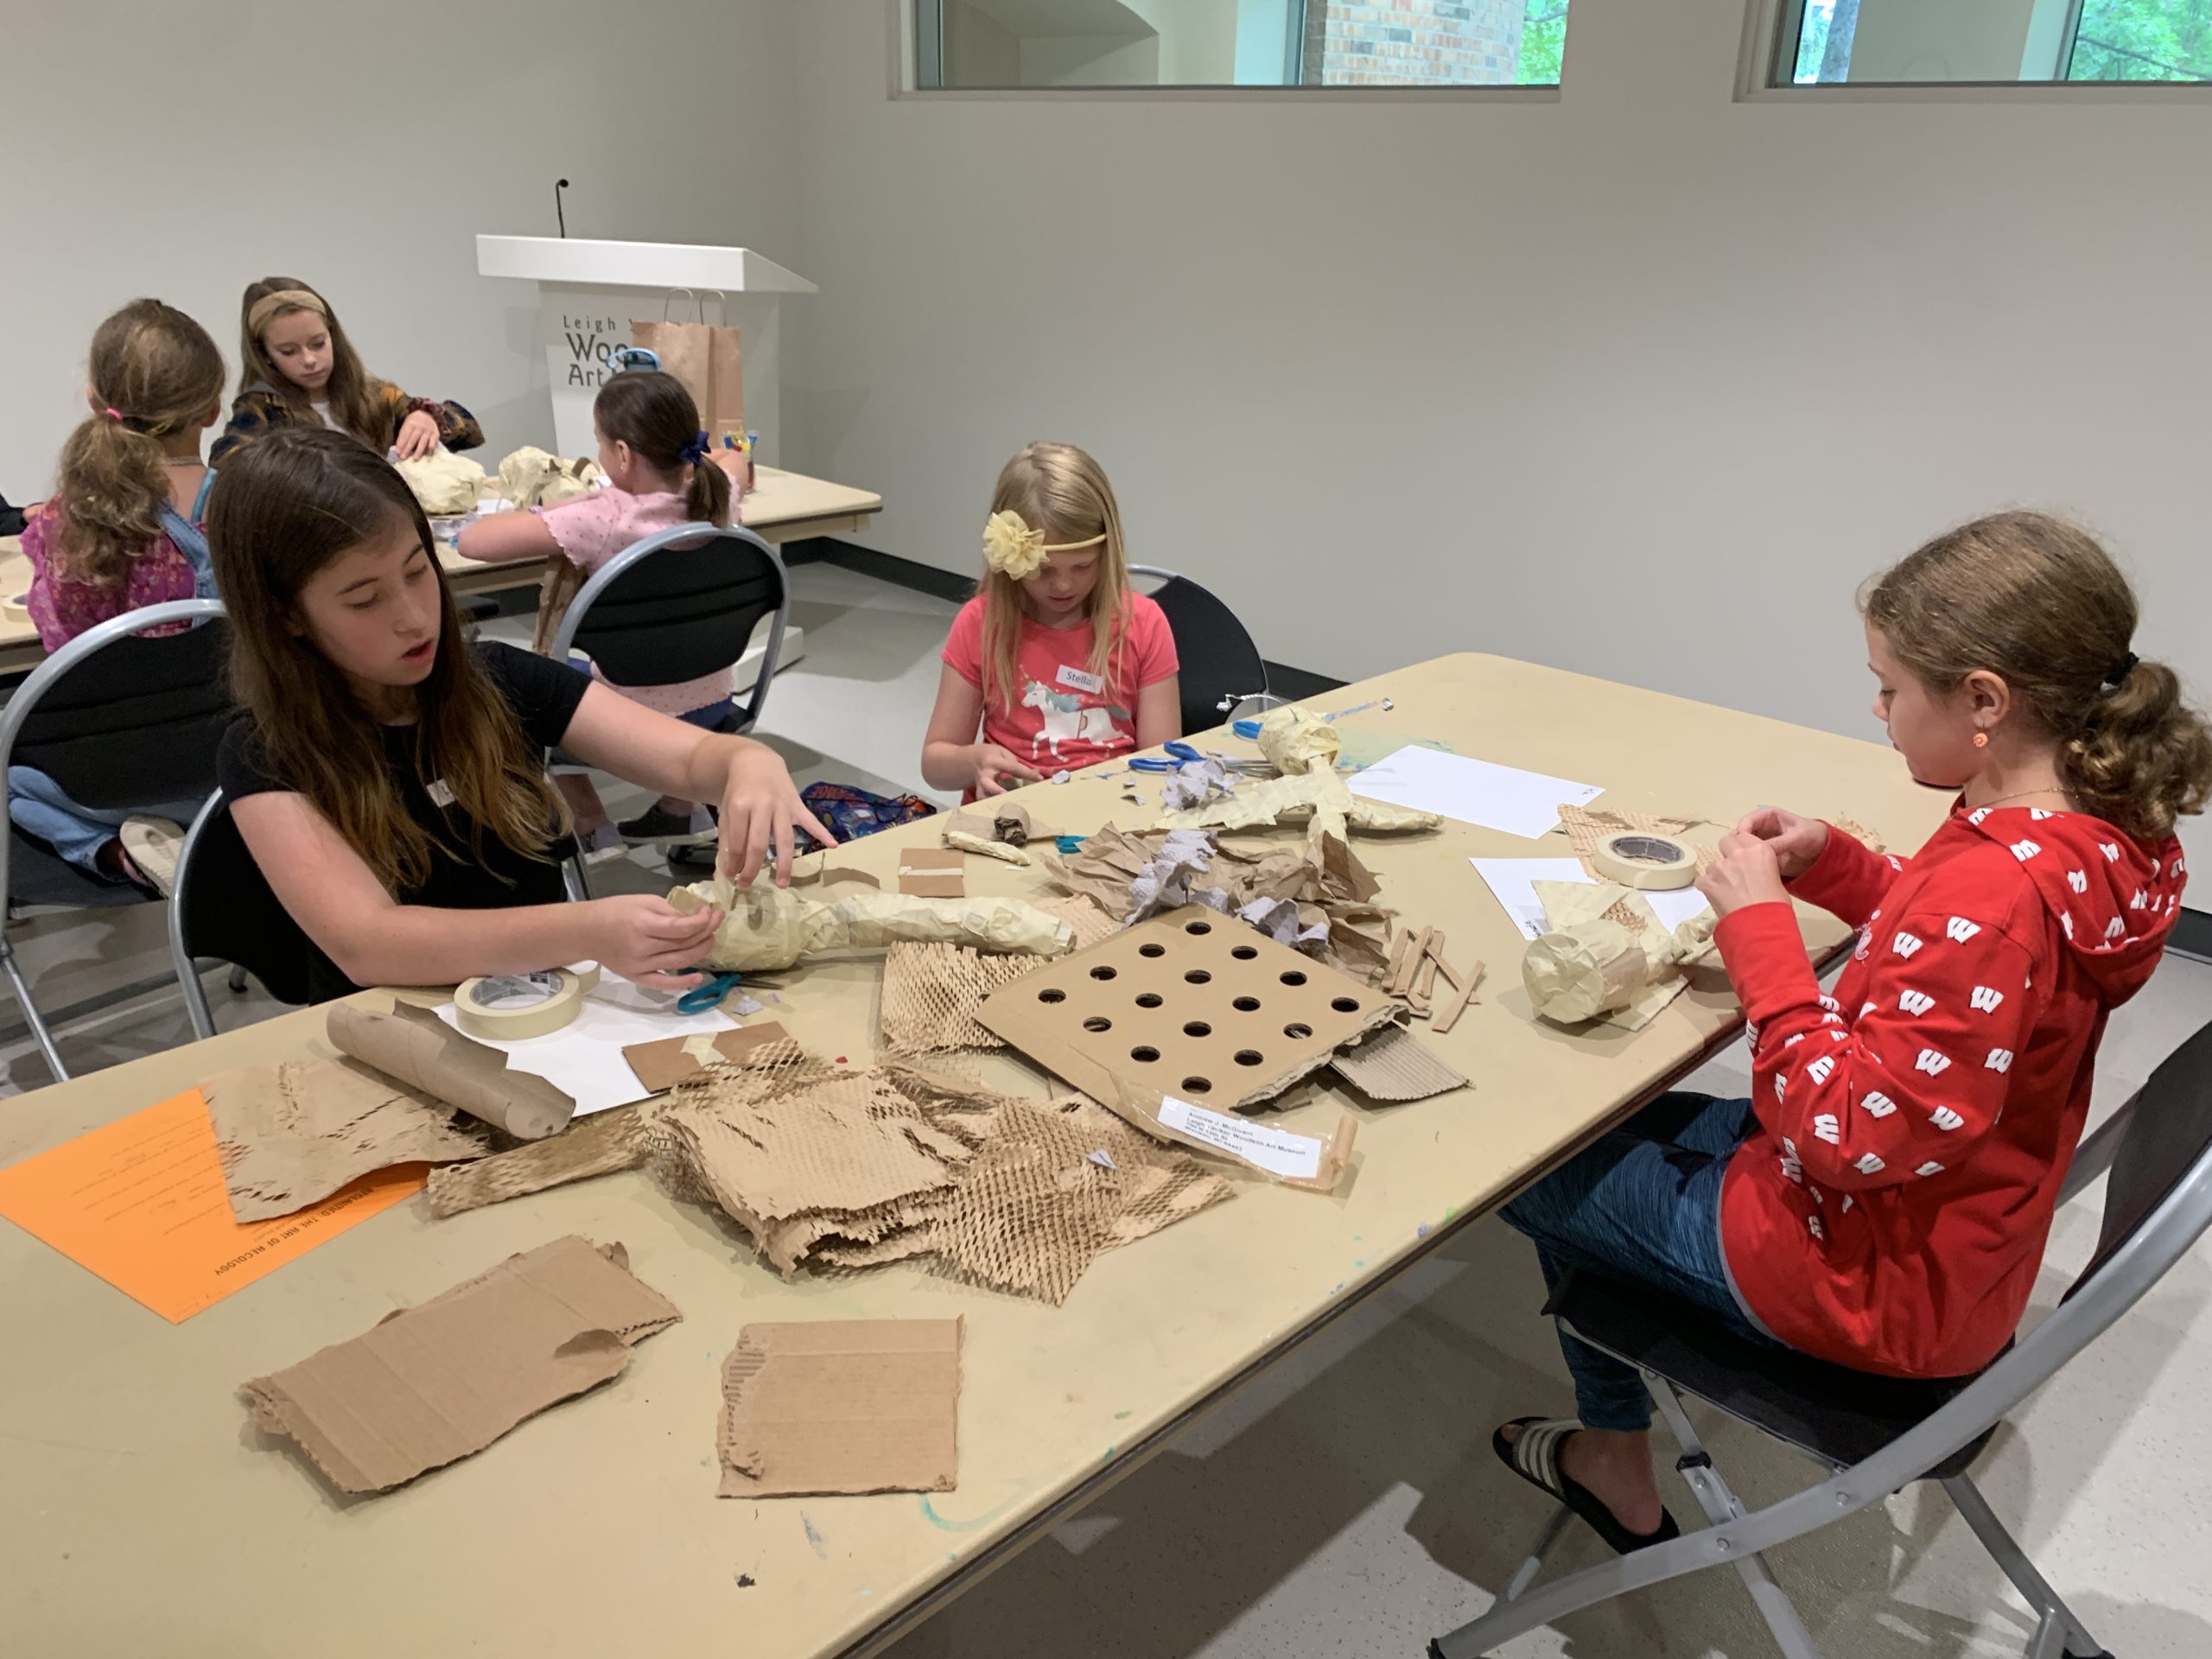 Children sit at a large folding table filled with cardboard, paper, and tape they are using to created recycled insect sculptures. 